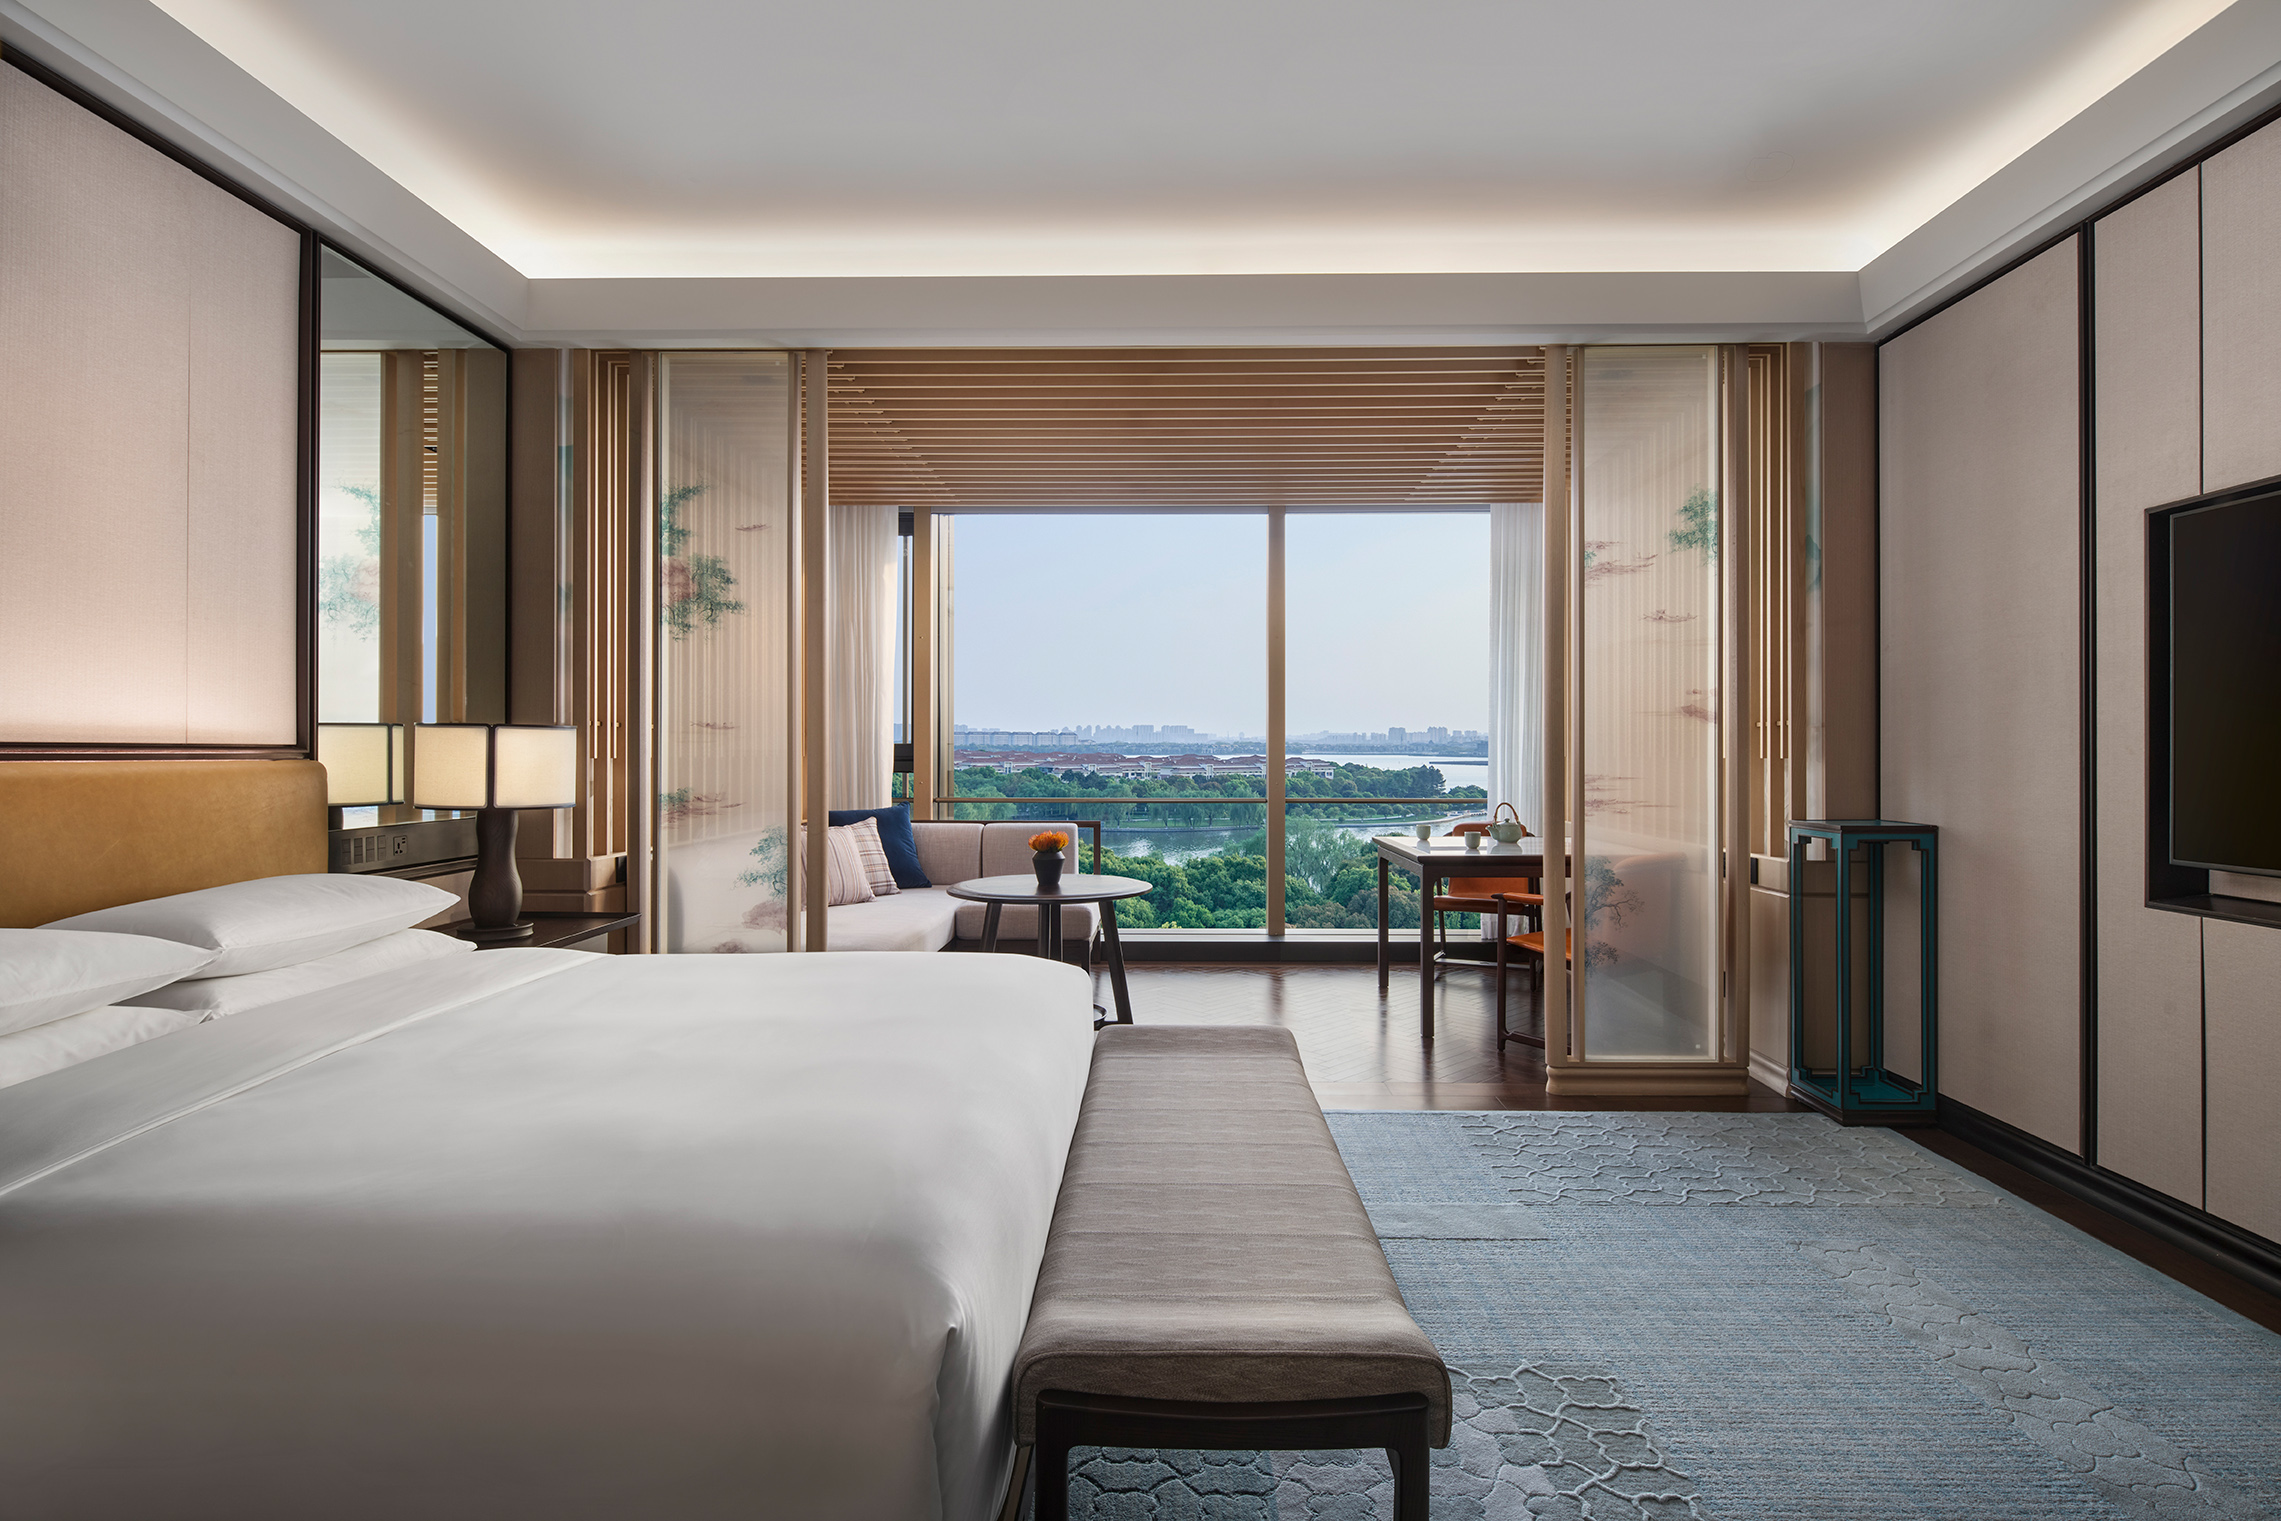 The Park Hyatt Suzhou's 178 rooms and suites range from 50 to 173 square meters and are “inspired by the sleeping chambers of Ancient Suzhou mansions”. Click to enlarge.